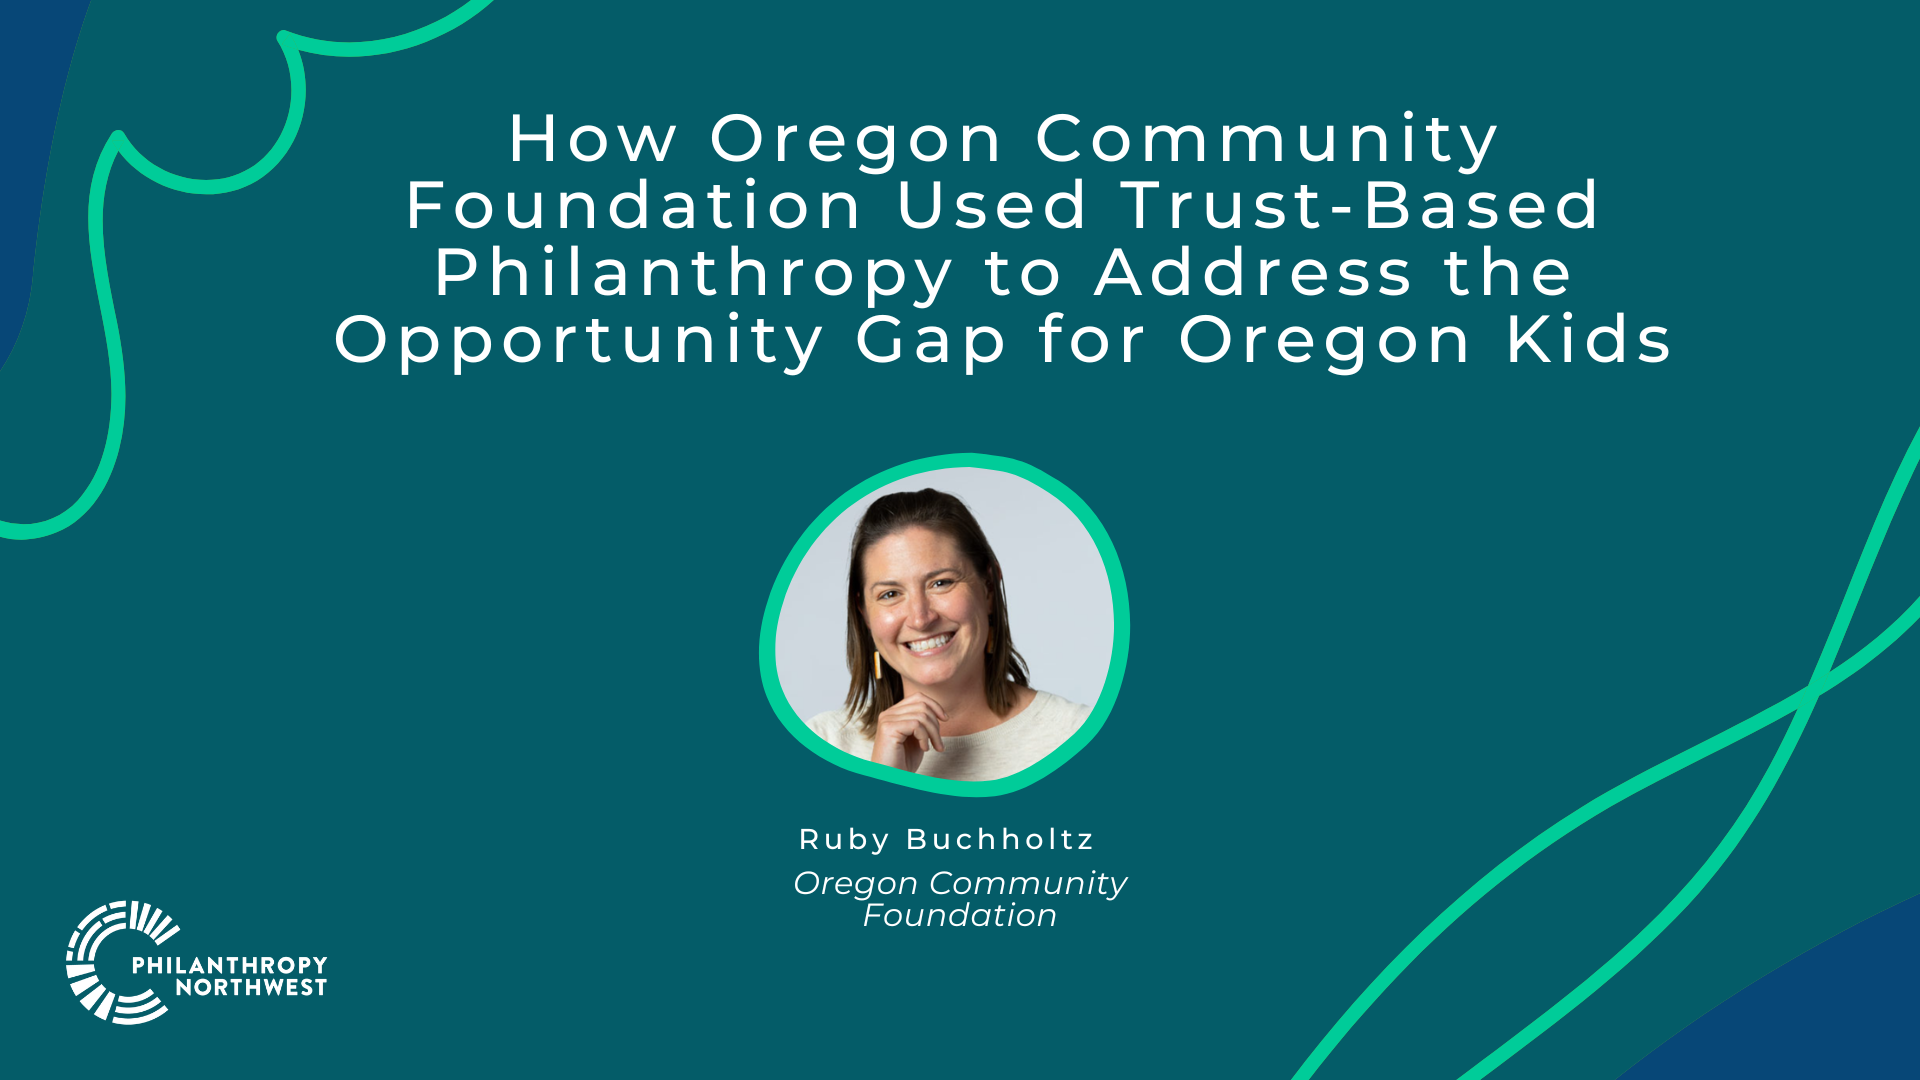 Ocean blue graphic with emerald green and blueberry blue blob shapes in the corners. The title reads "How Oregon Community Foundation Used Trust-Based Philanthropy in their Efforts to Address the Opportunity Gap for Oregon Kids". Headshot for Ruby Buchhol